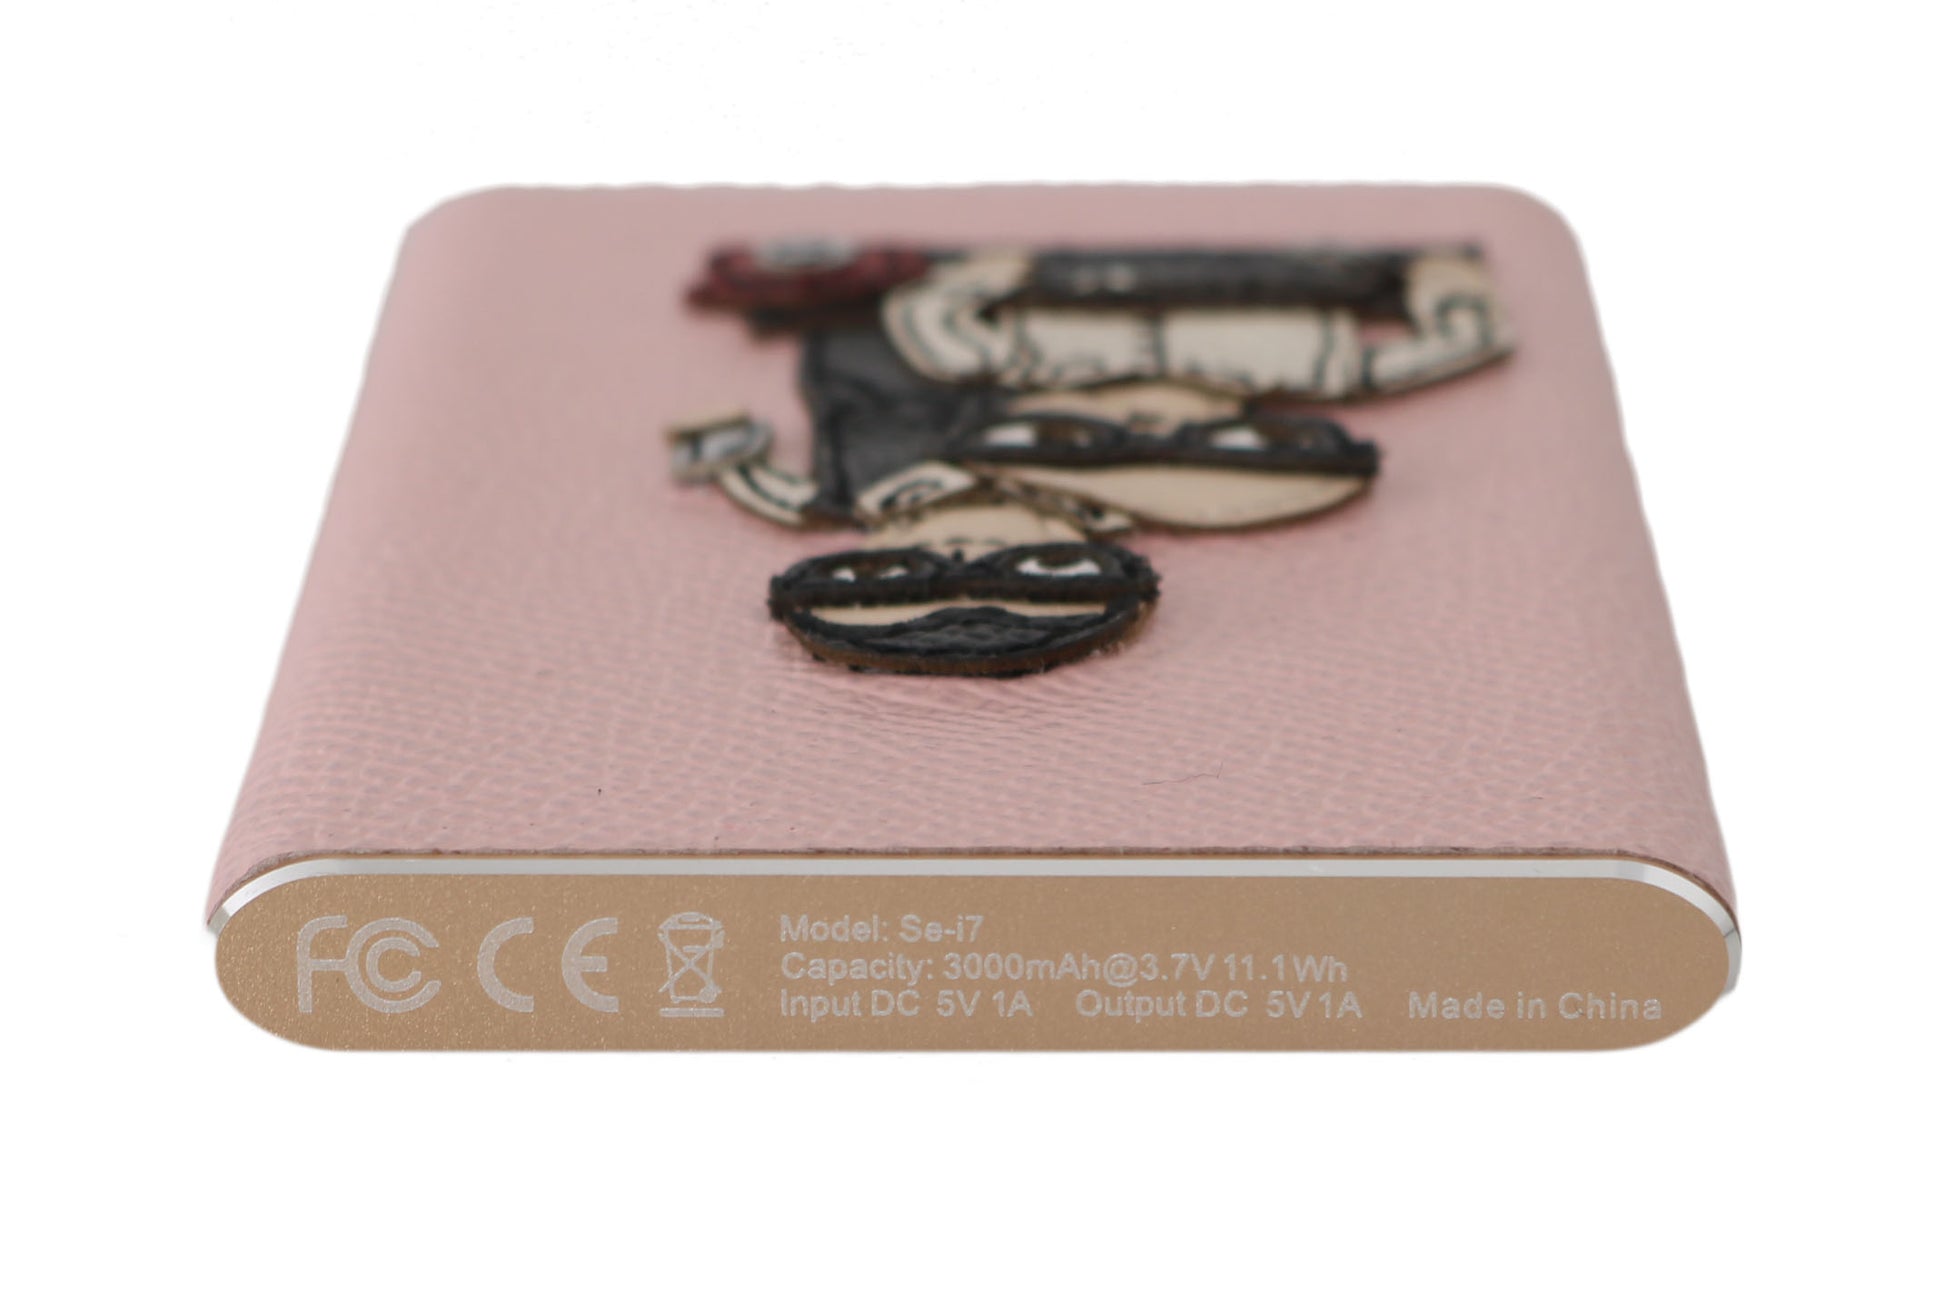 Charger USB Pink Leather #DGFAMILY Power Bank - Designed by Dolce & Gabbana Available to Buy at a Discounted Price on Moon Behind The Hill Online Designer Discount Store